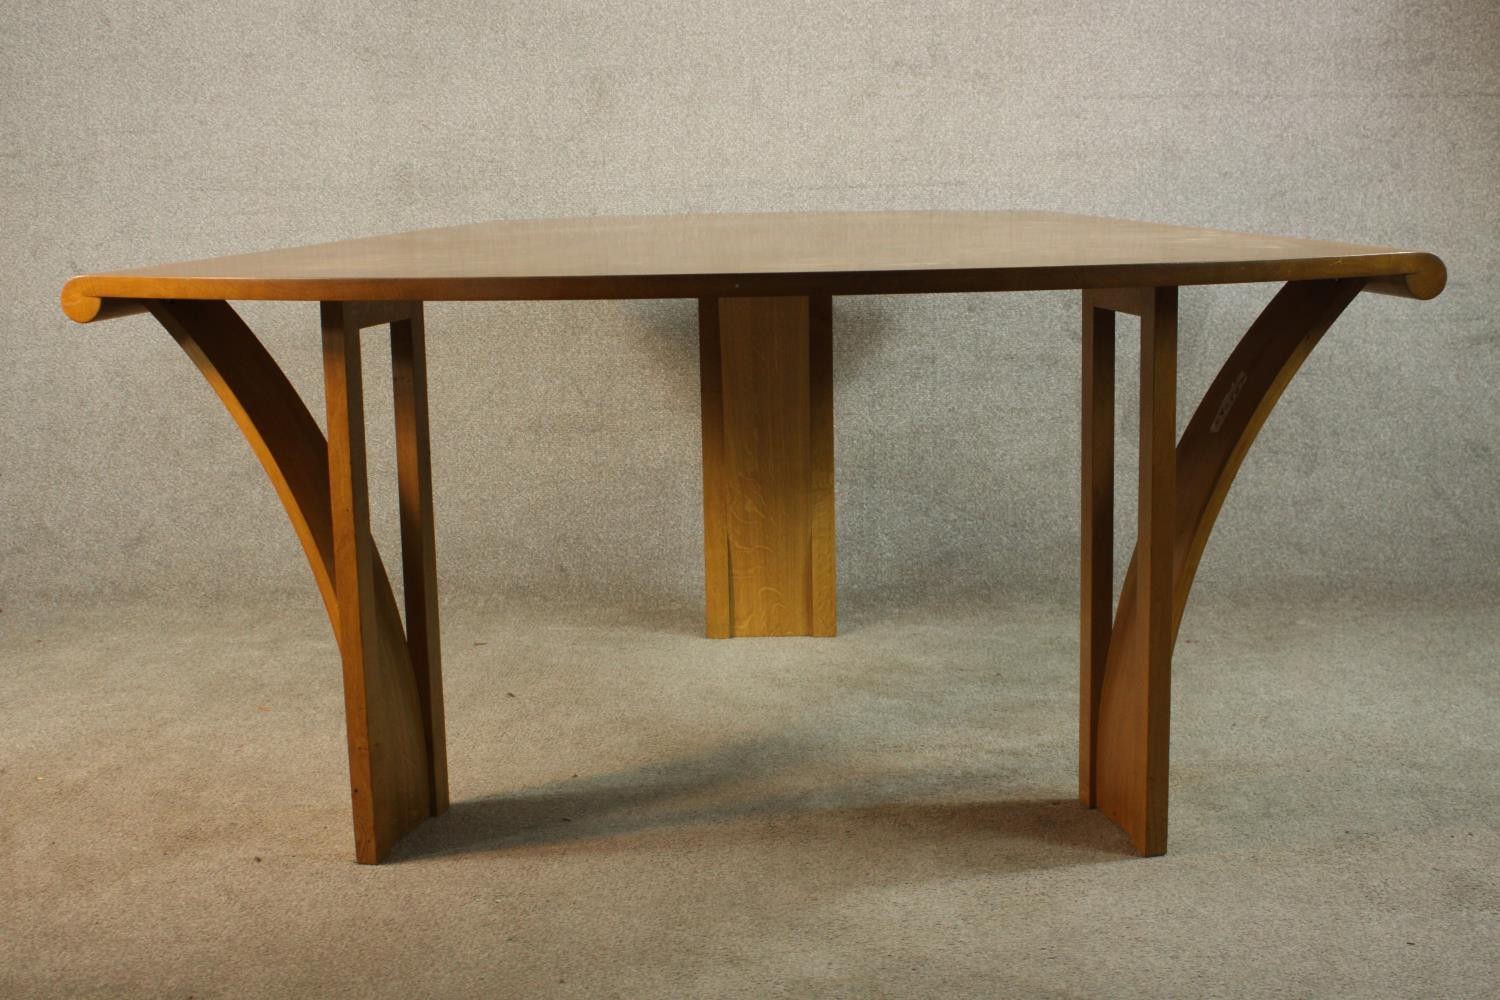 Attributed to Robert Williams (b.1942) for Pearl Dot, Islington, an oak dining table, circa 1980s, - Image 6 of 15